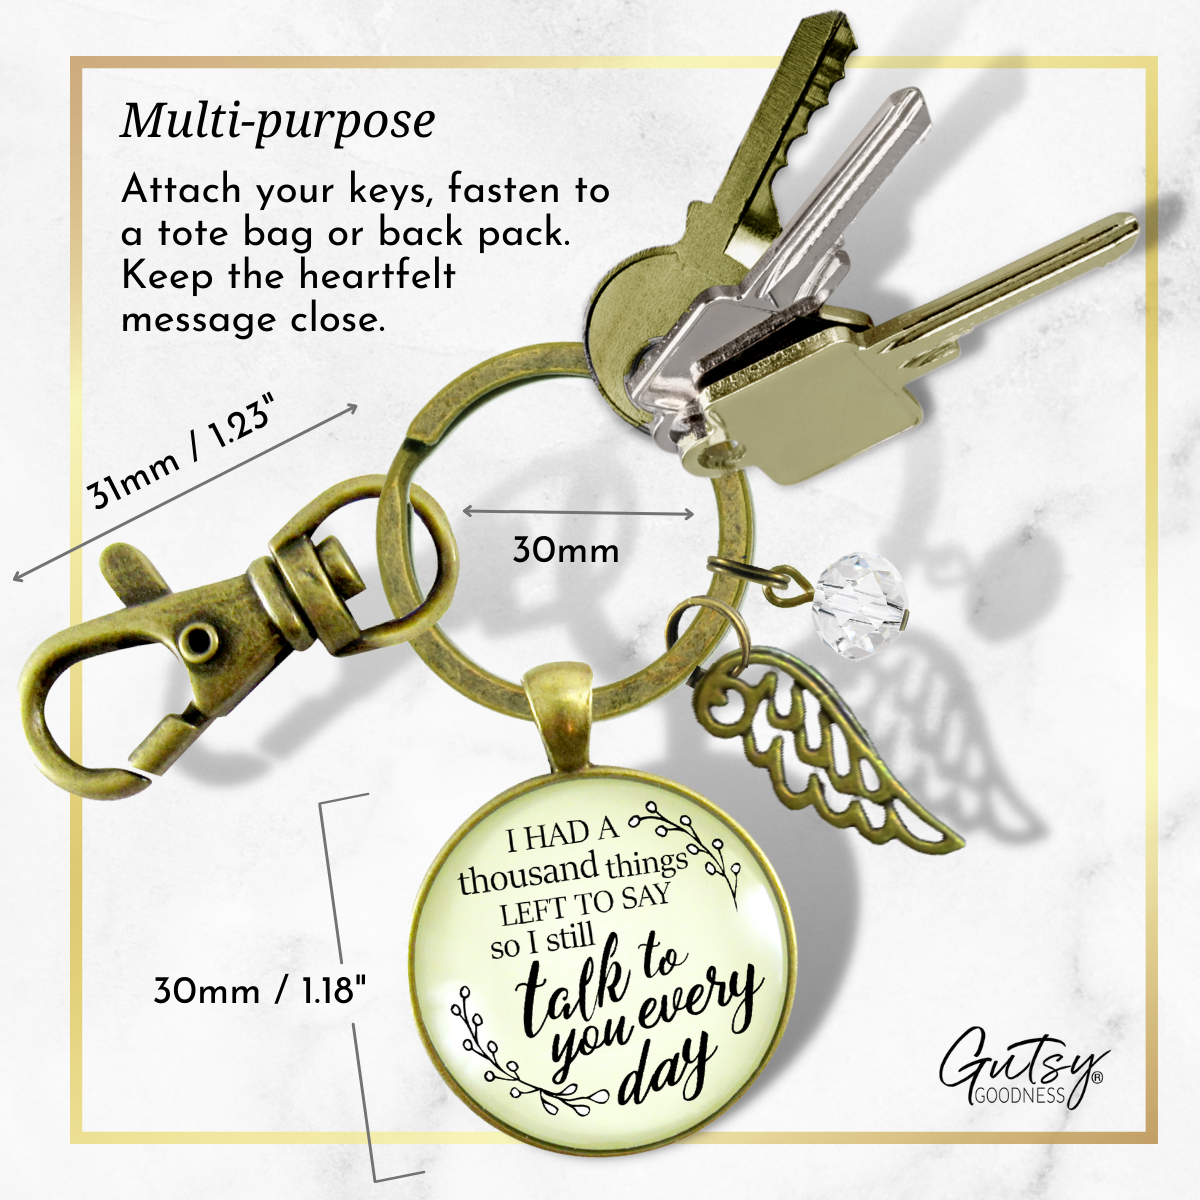 Remembrance Keychain Thousand Things Miss You Memorial Jewelry - Gutsy Goodness Handmade Jewelry;Remembrance Keychain Thousand Things Miss You Memorial Jewelry - Gutsy Goodness Handmade Jewelry Gifts